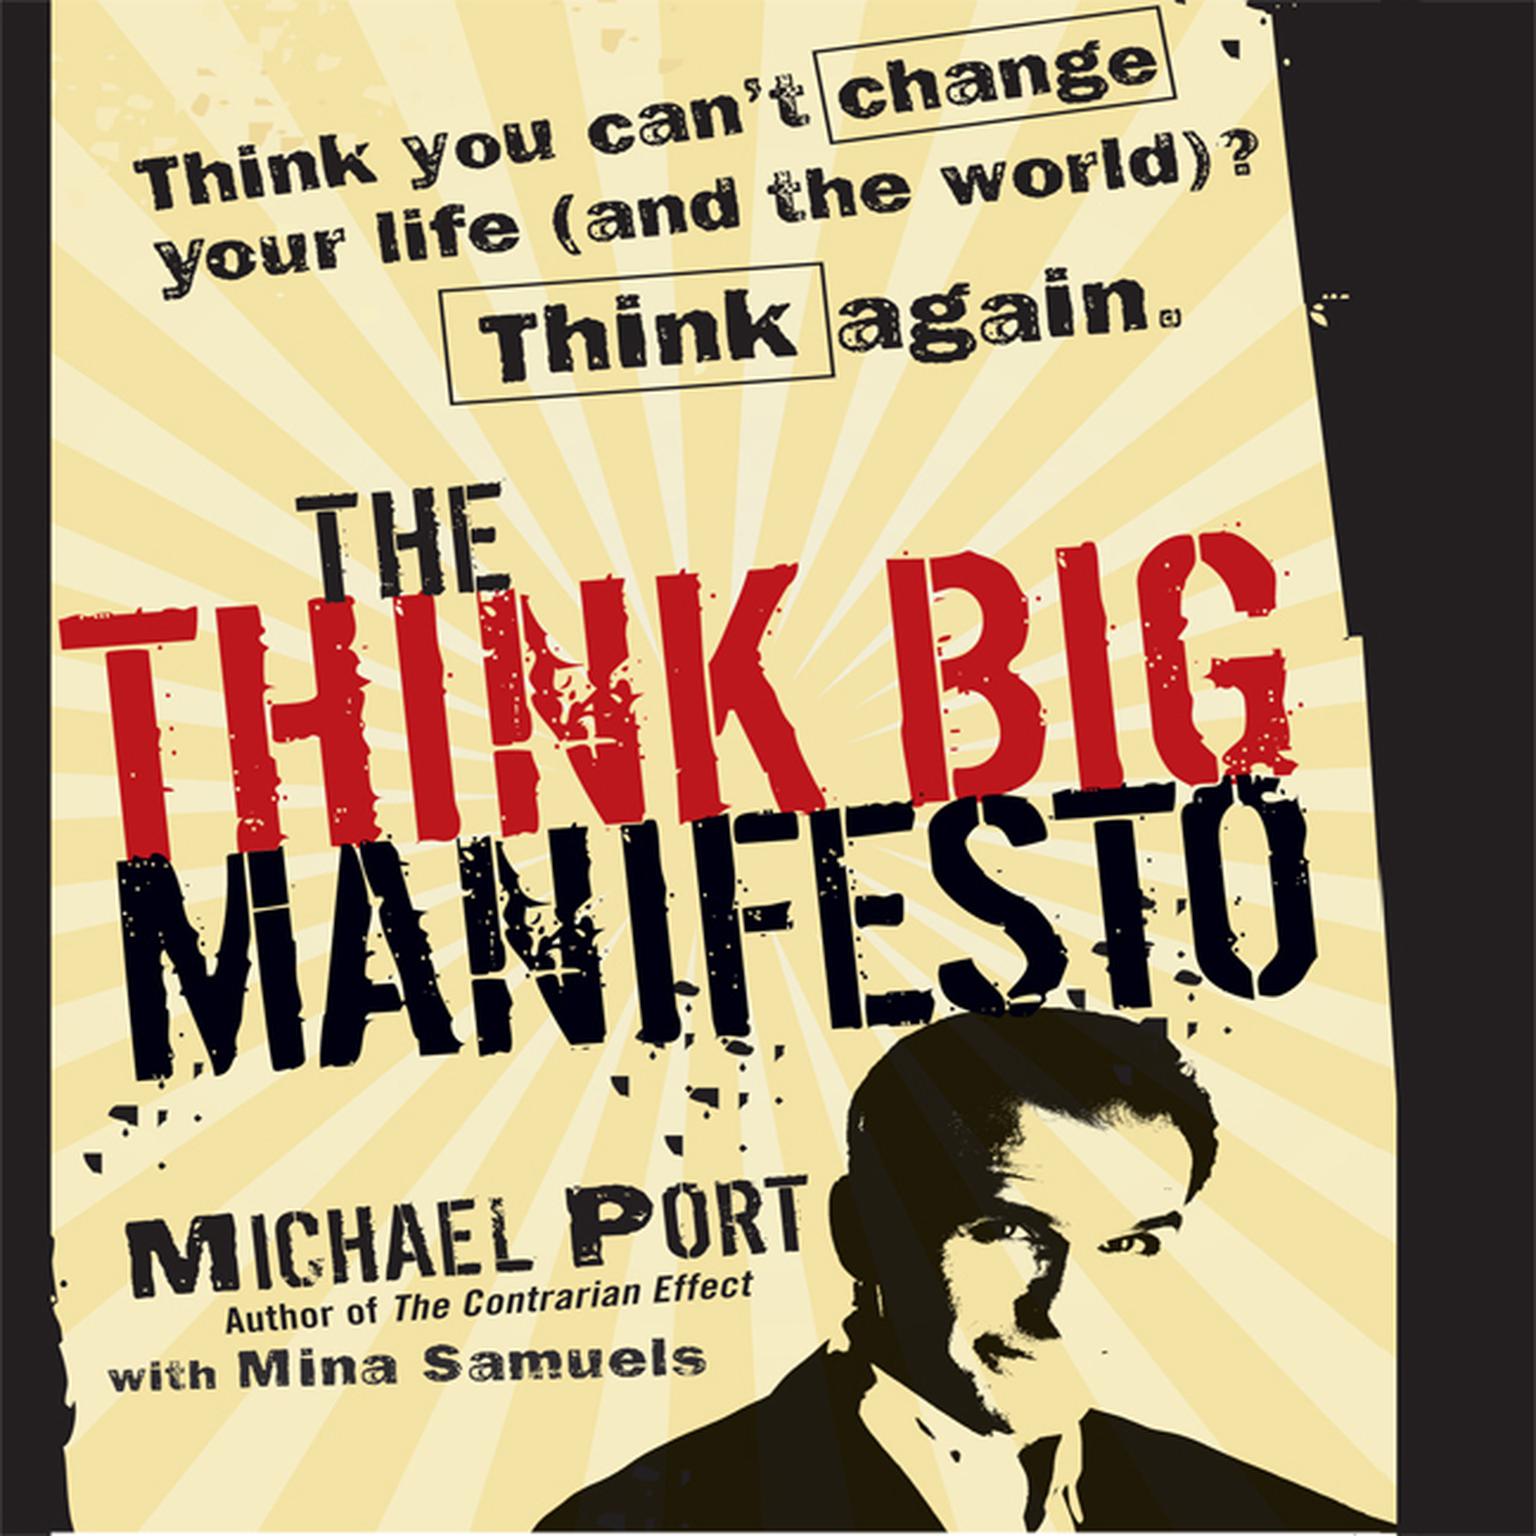 The Think Big Manifesto: Think You Cant Change Your Life (and the World) Think Again Audiobook, by Michael Port